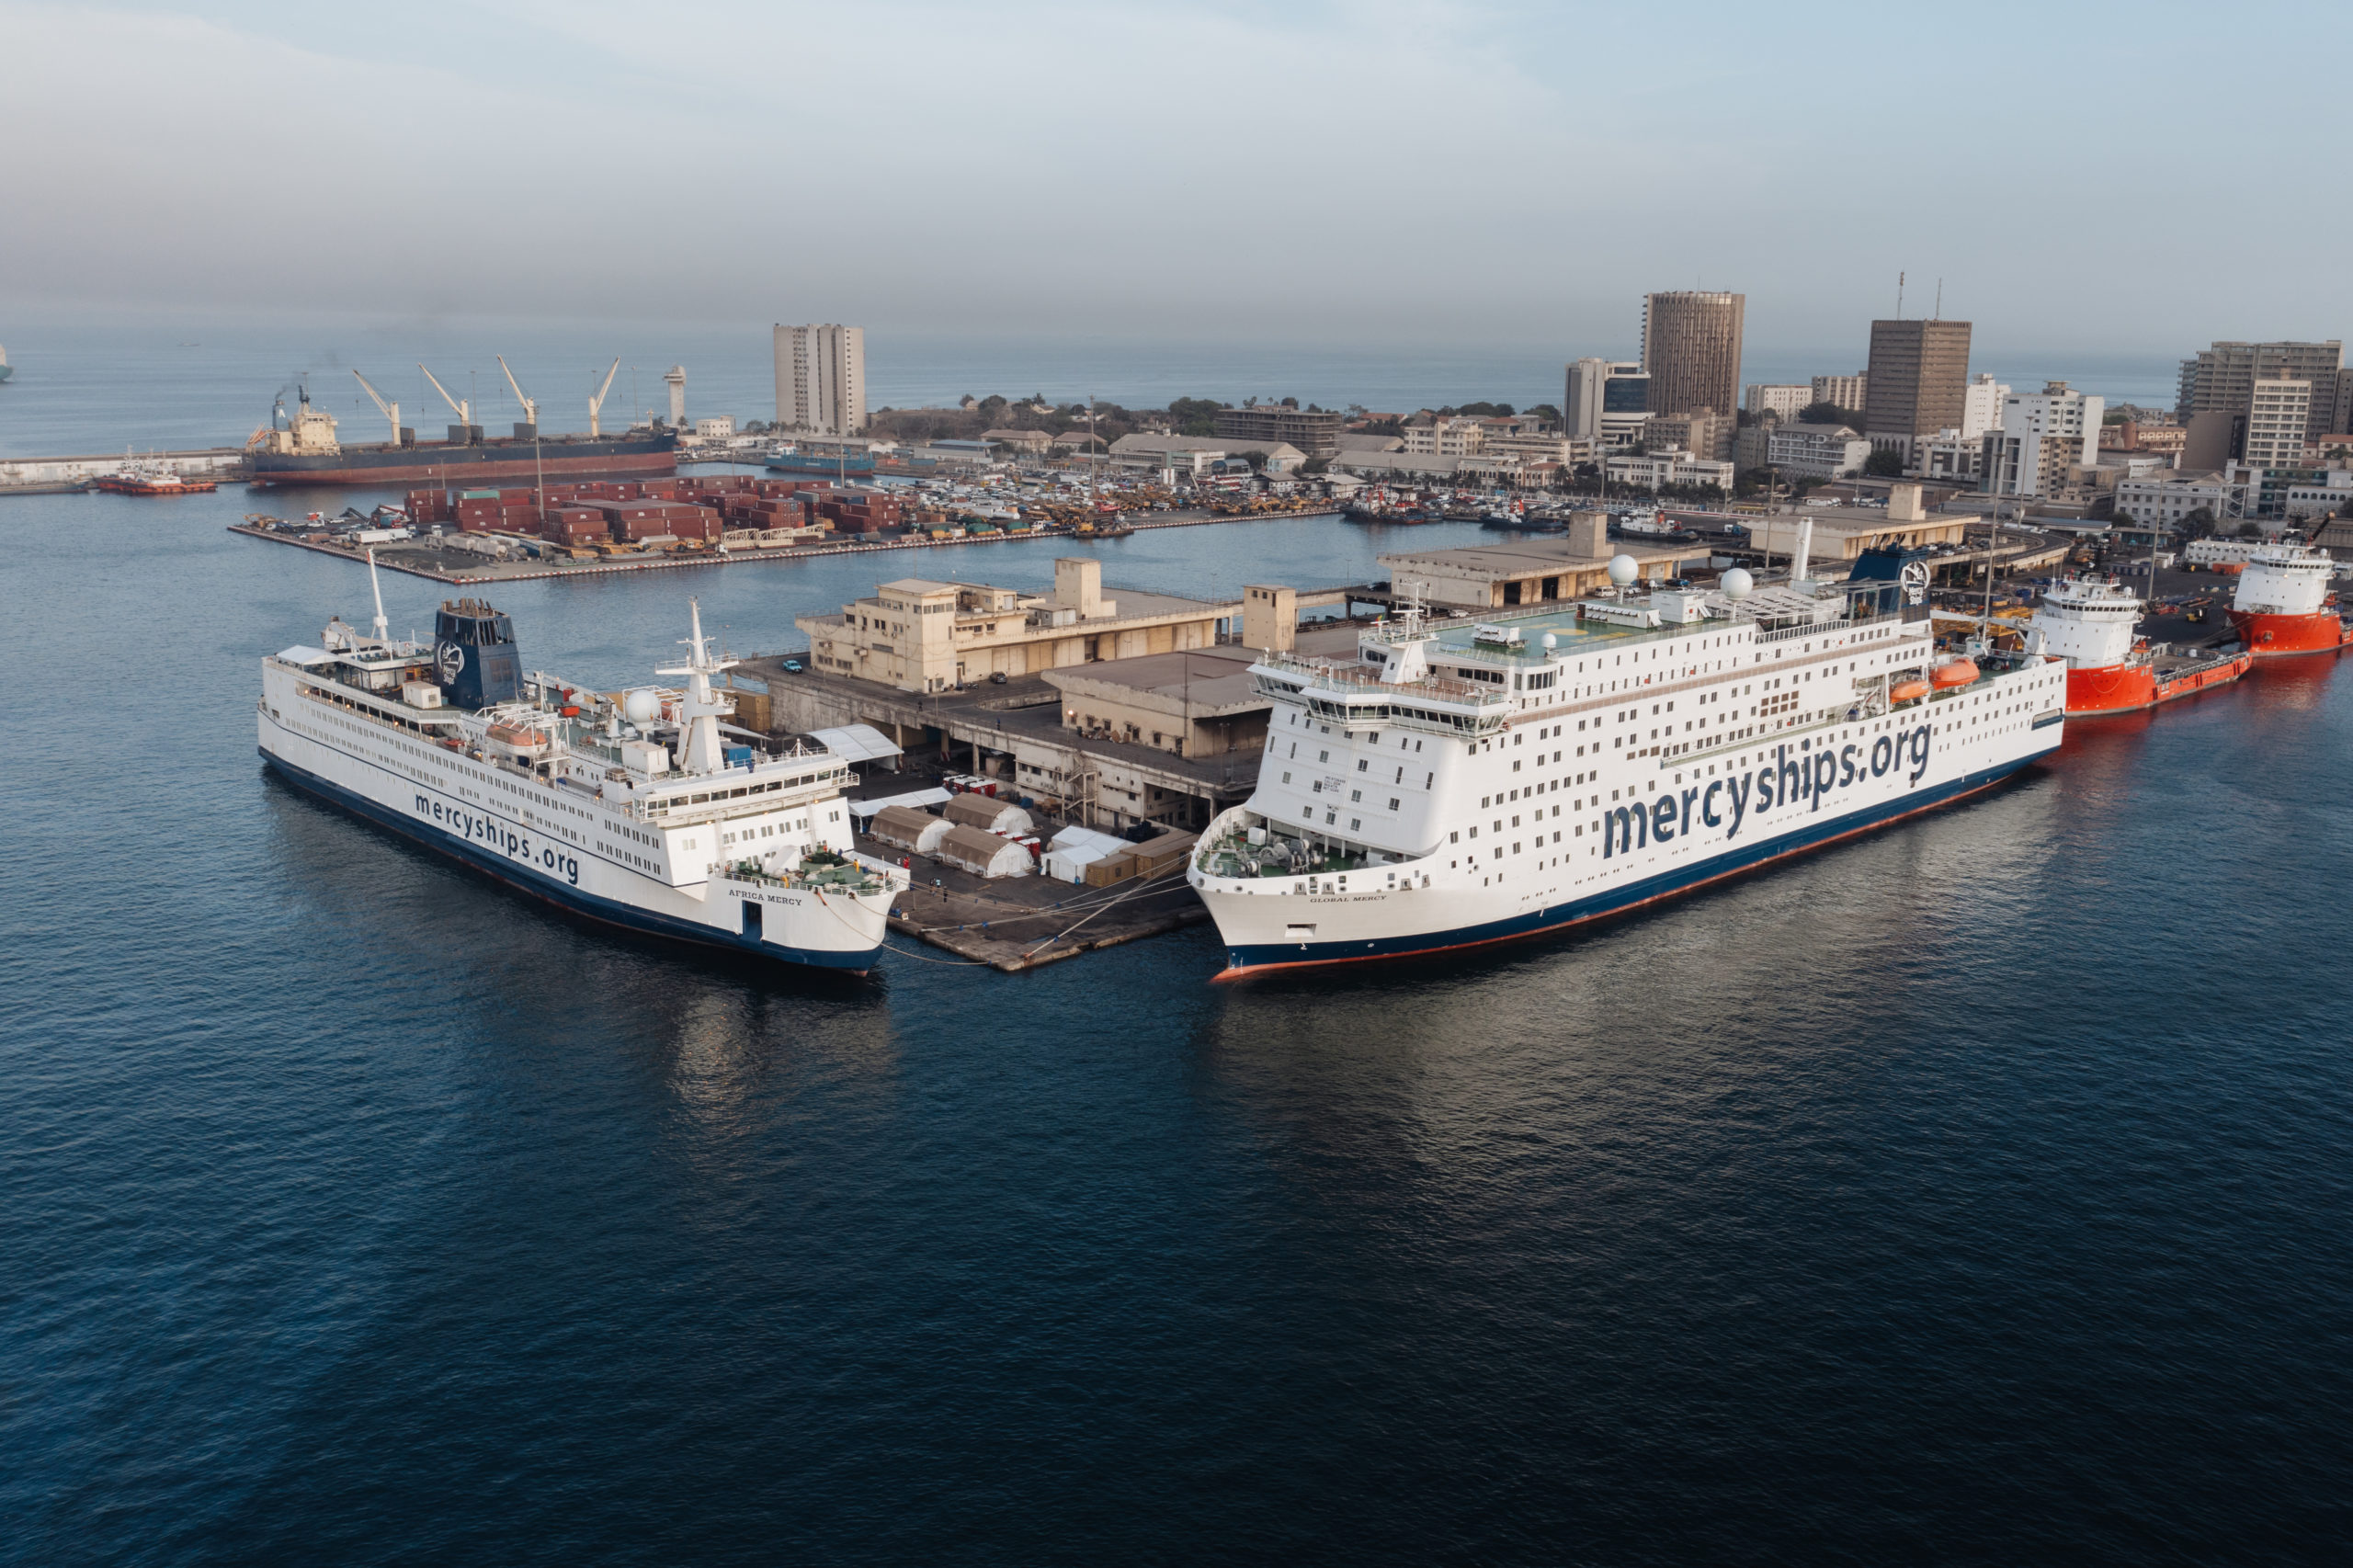 NEW HOSPITAL SHIP, THE GLOBAL MERCY, BRINGS LOCAL HEALTHCARE TRAINING IN WEST AFRICA